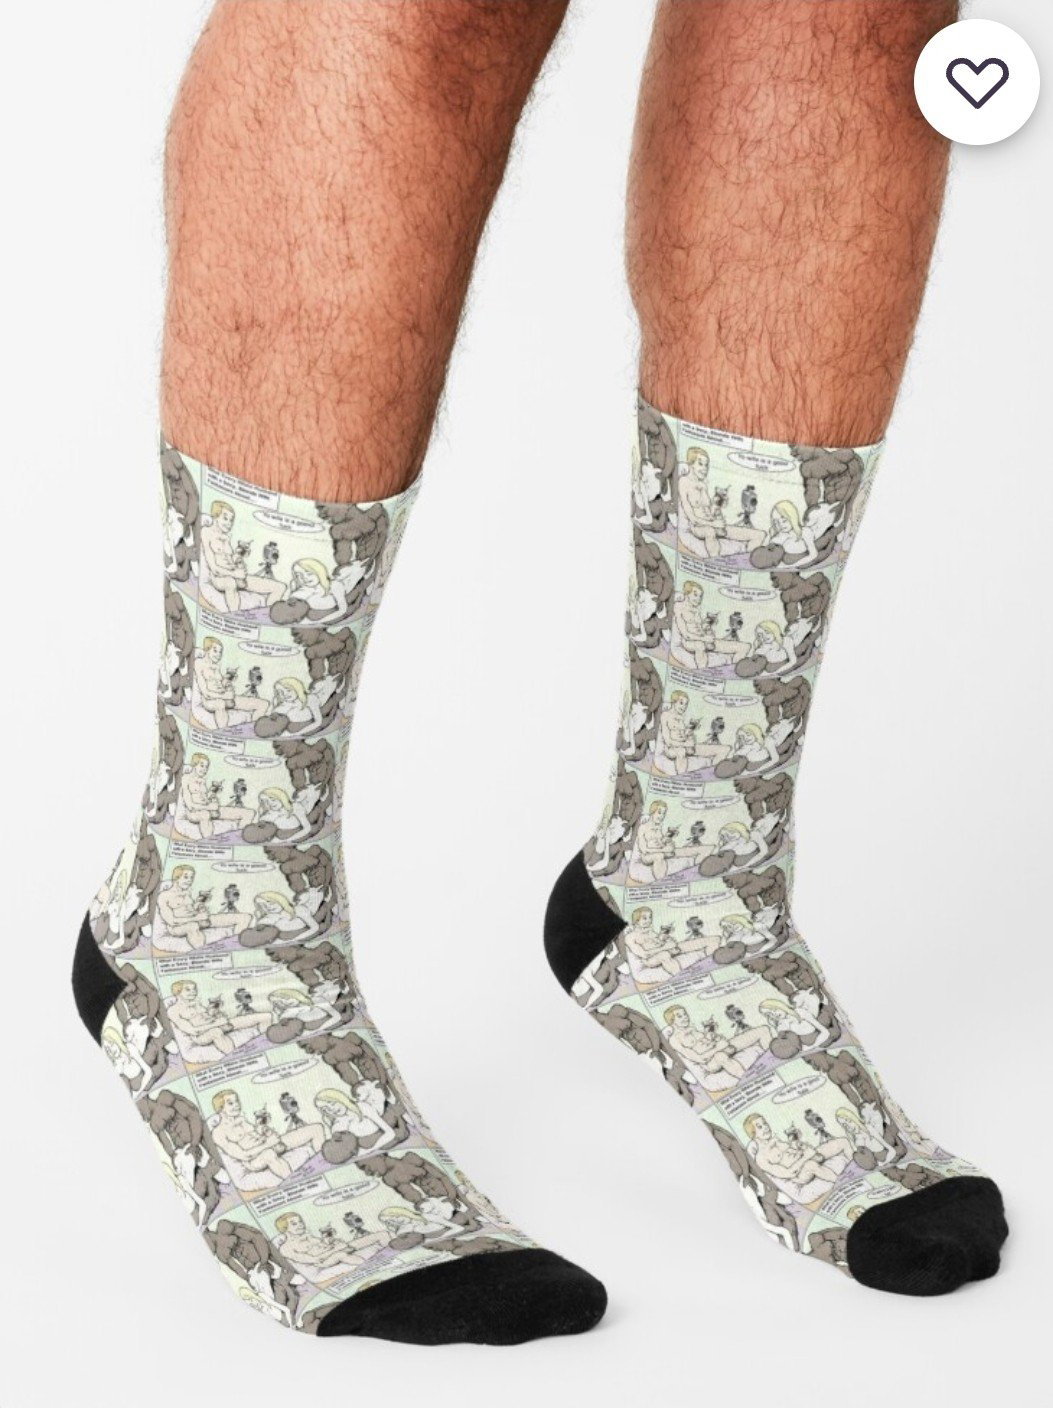 Watch the Photo by Niftywizard with the username @Niftywizard, who is a verified user, posted on October 9, 2023 and the text says 'Hotwife socks

Adult hotwife socks https://www.redbubble.com/shop/ap/153354921?asc=u'